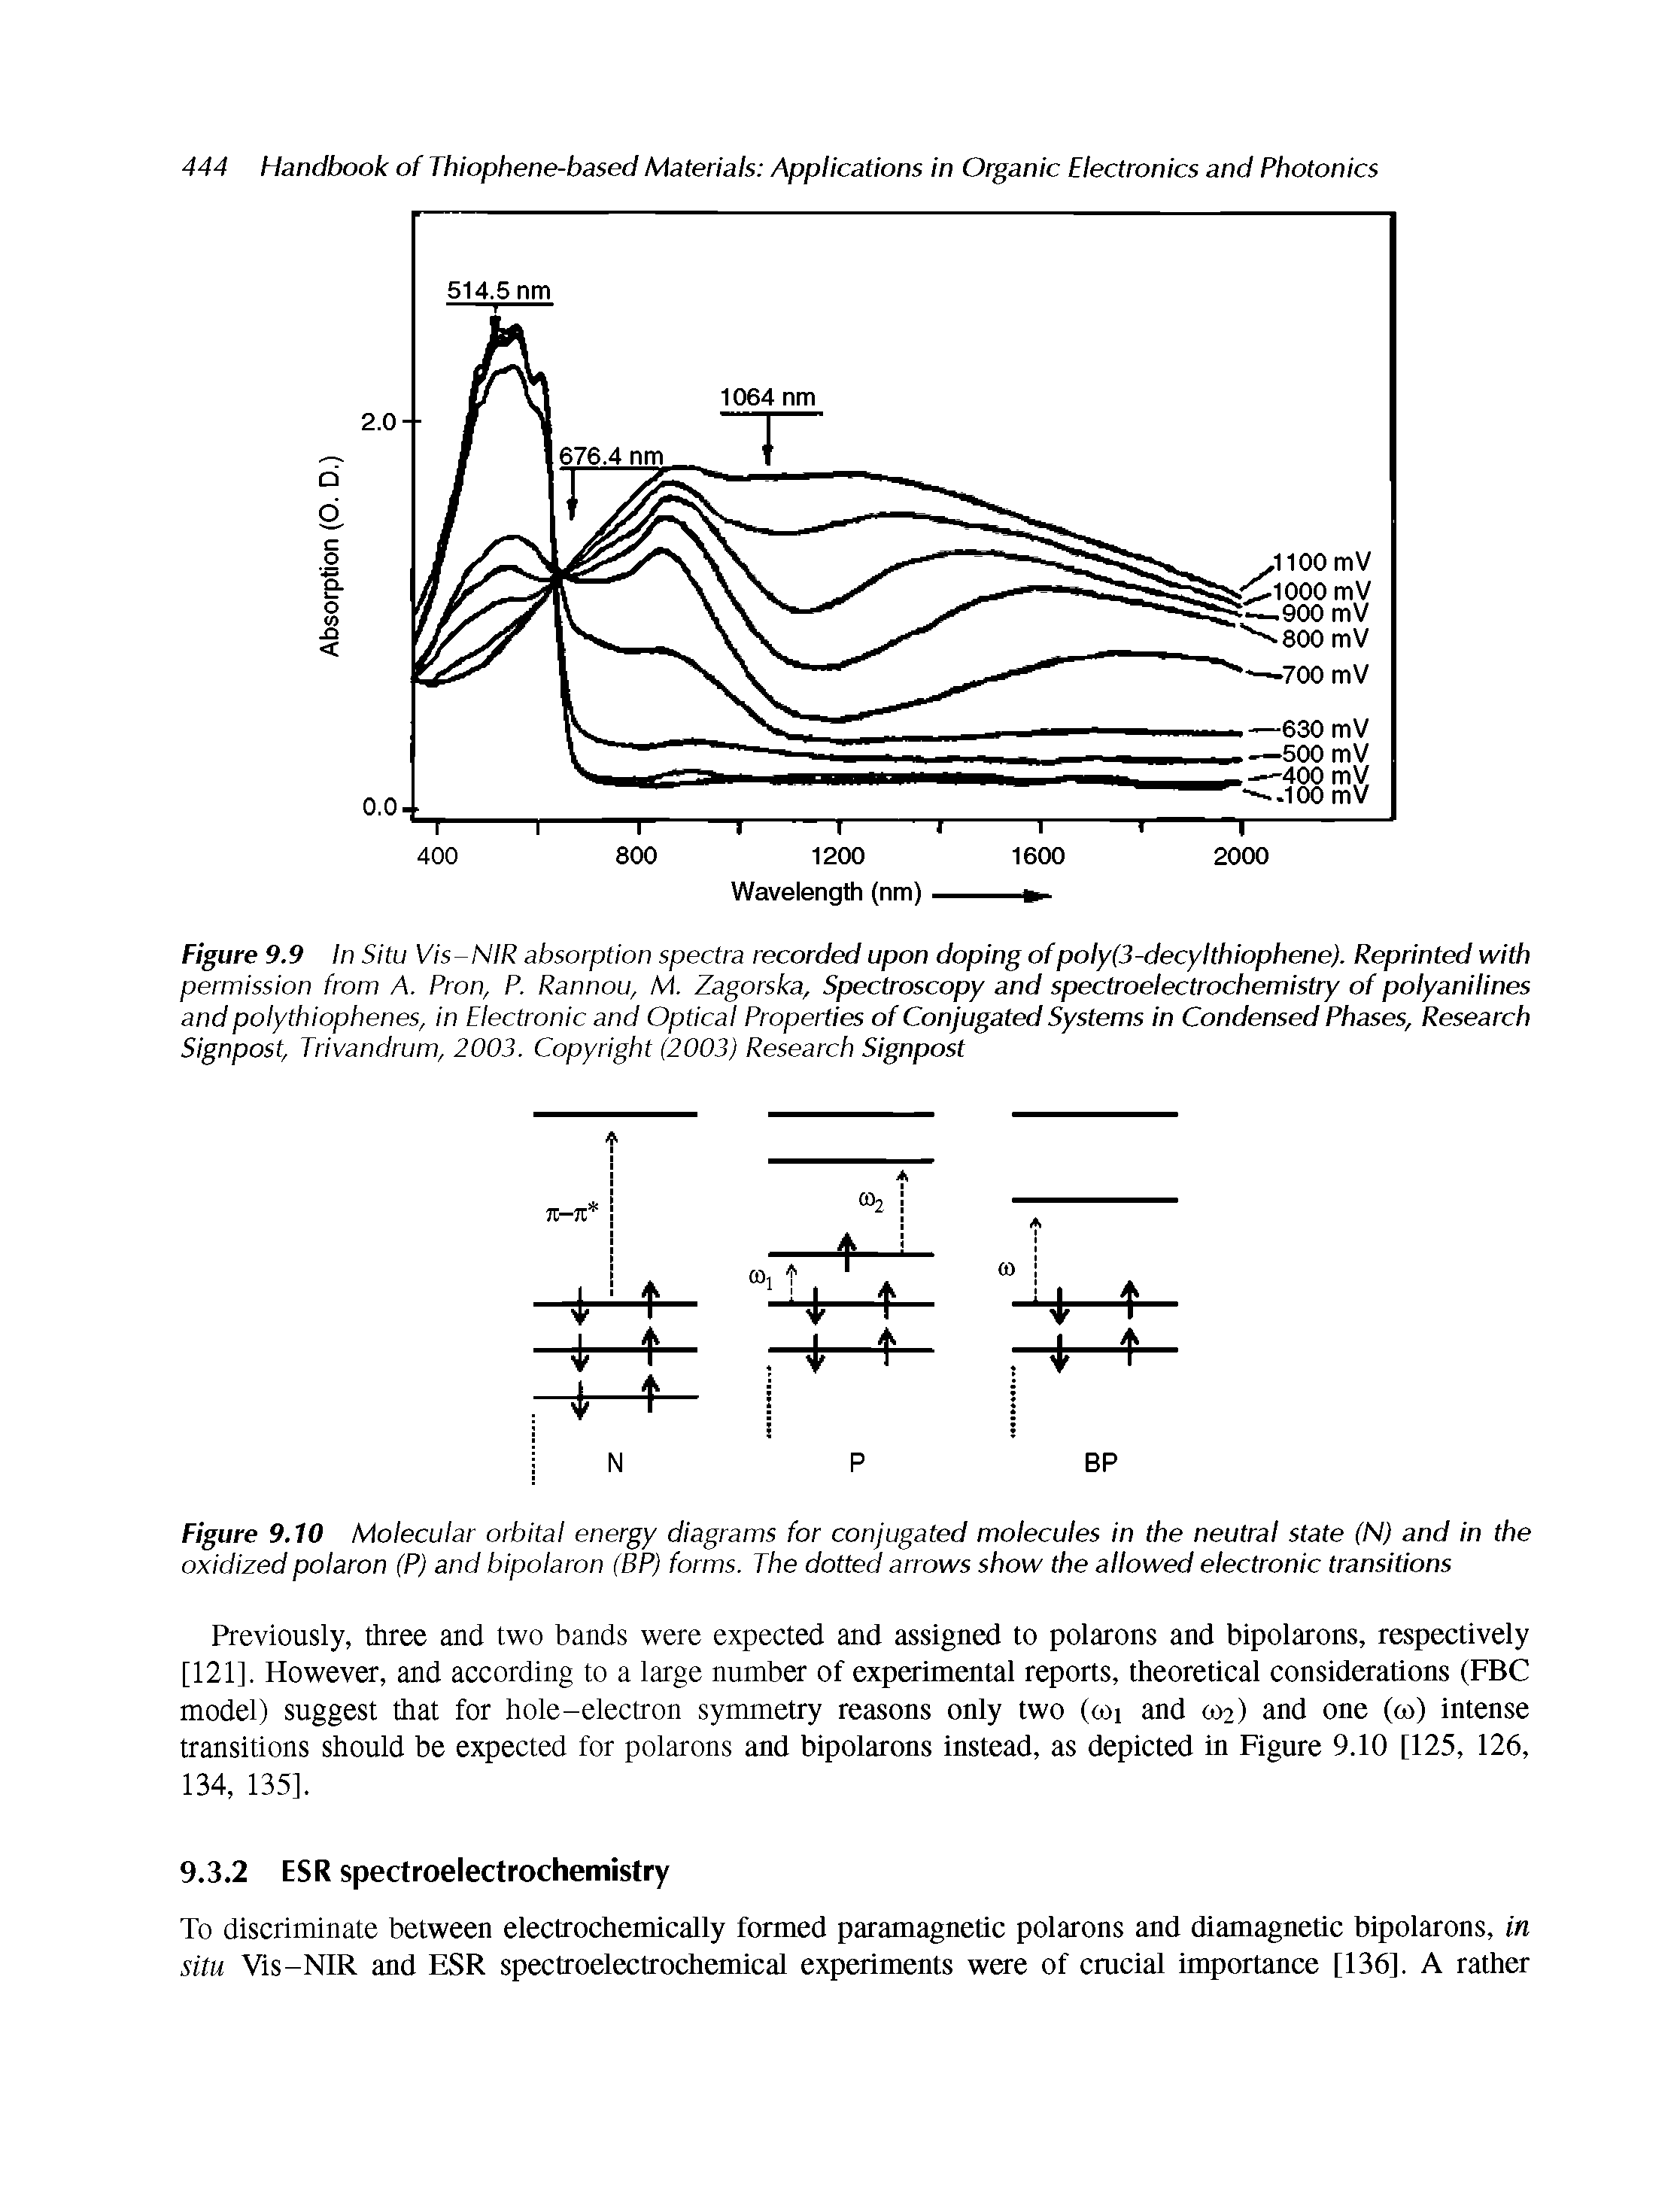 Figure 9.9 In Situ Vis-NIR absorption spectra recorded upon doping of poly(3-decylthiophene). Reprinted with permission from /. Pron, P. Rannou, M. Zagorska, Spectroscopy and spectroelectrochemistry of polyanilines and polythiophenes, in Electronic and Optical Properties of Conjugated Systems in Condensed Phases, Research Signpost, Trivandrum, 2003. Copyright (2003) Research Signpost...